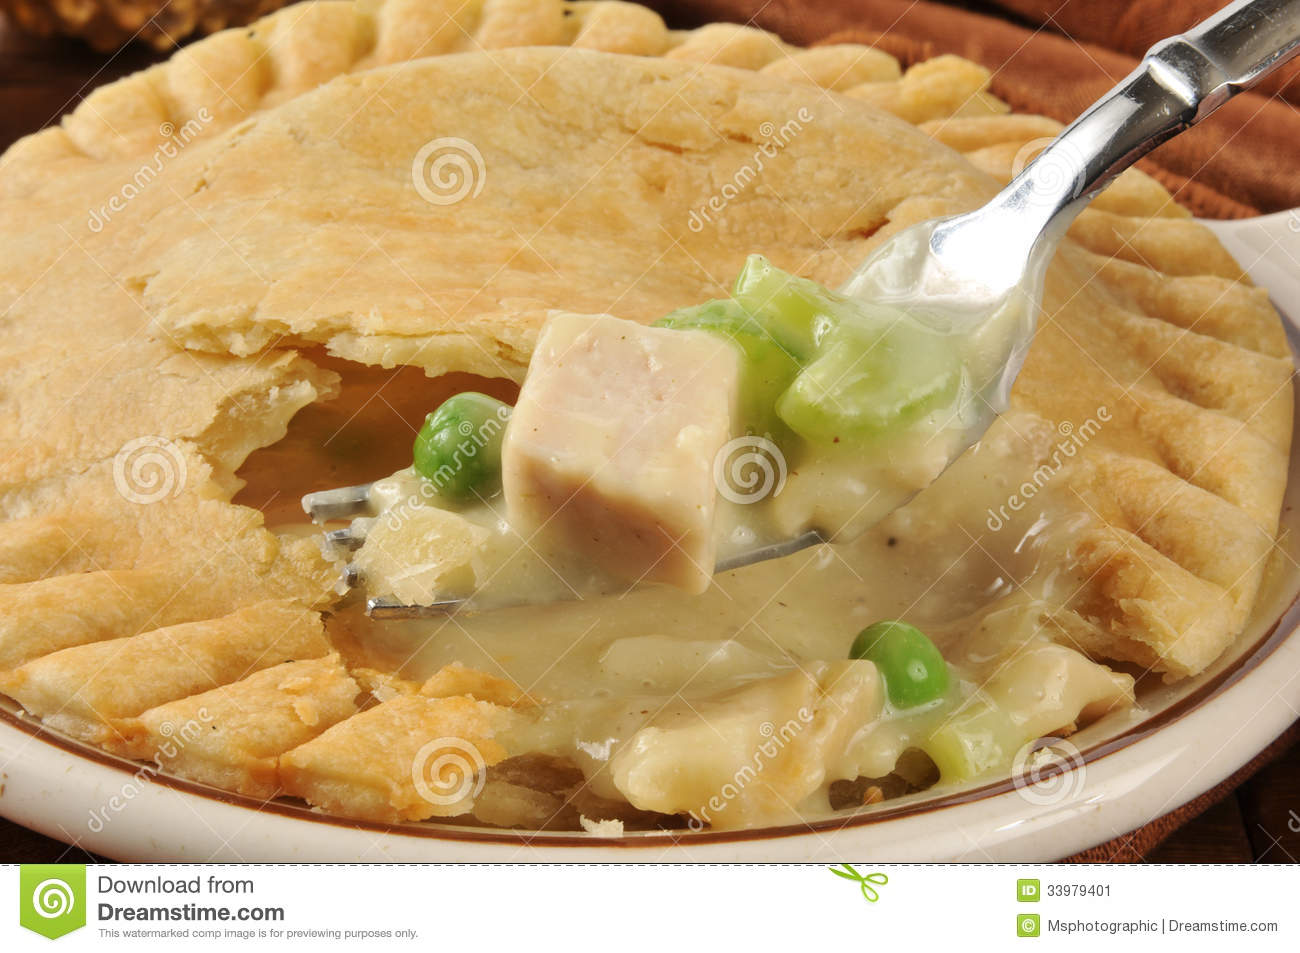 Forkful Of Chicken Pot Pie Stock Image   Image  33979401